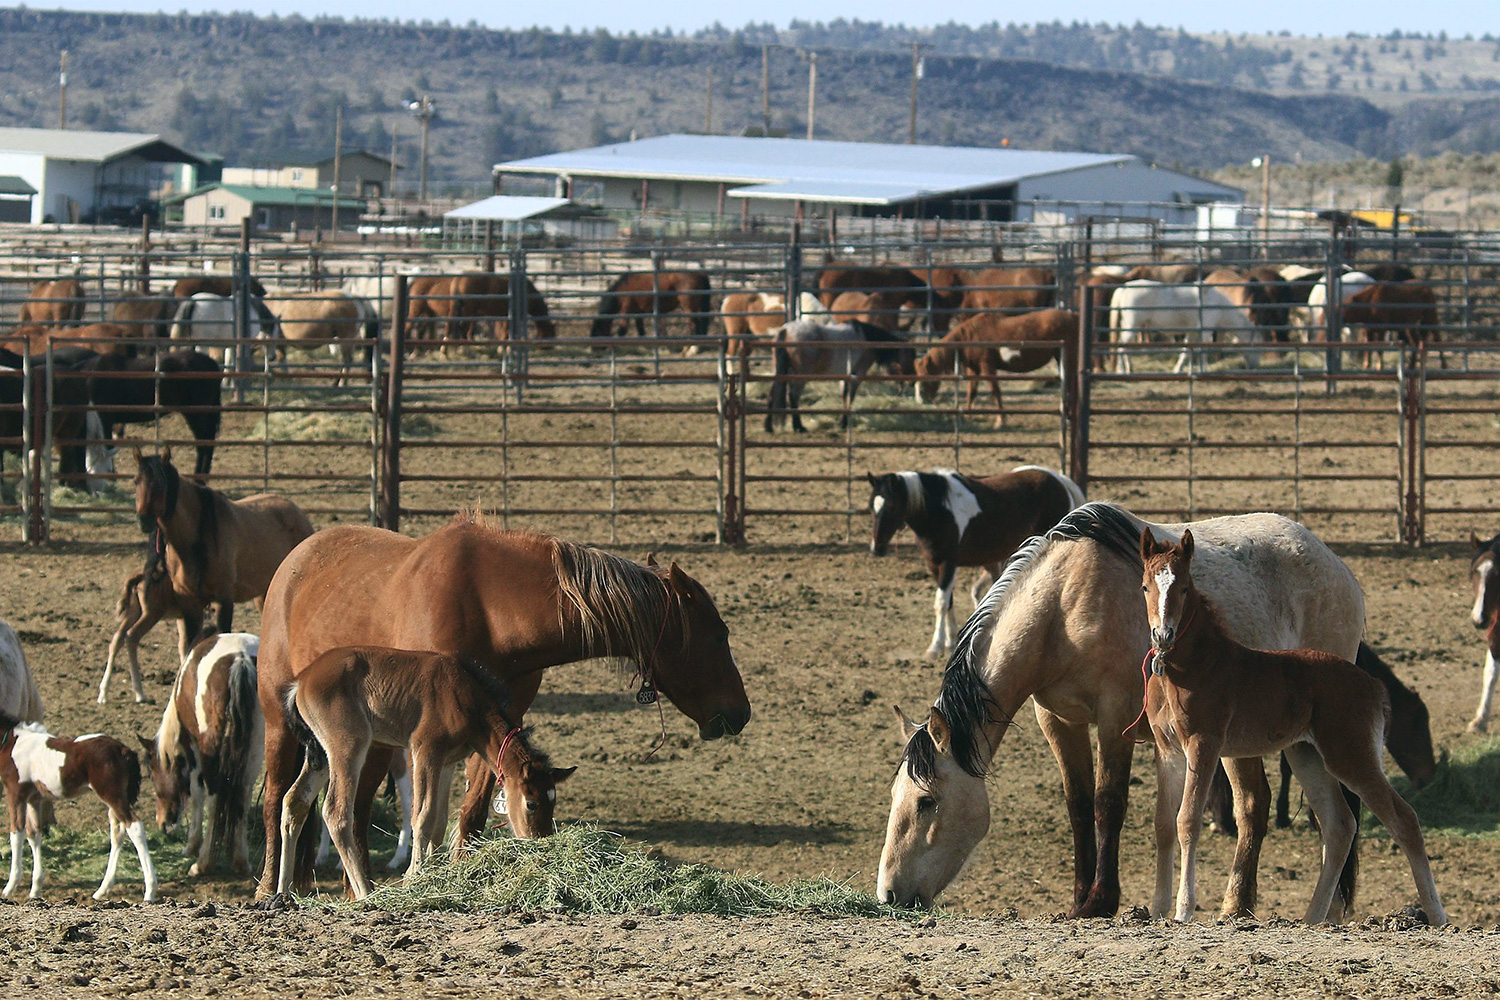 20210513coverstory-Horses-in-pens-at-wild-horse-corral.BK6_1587